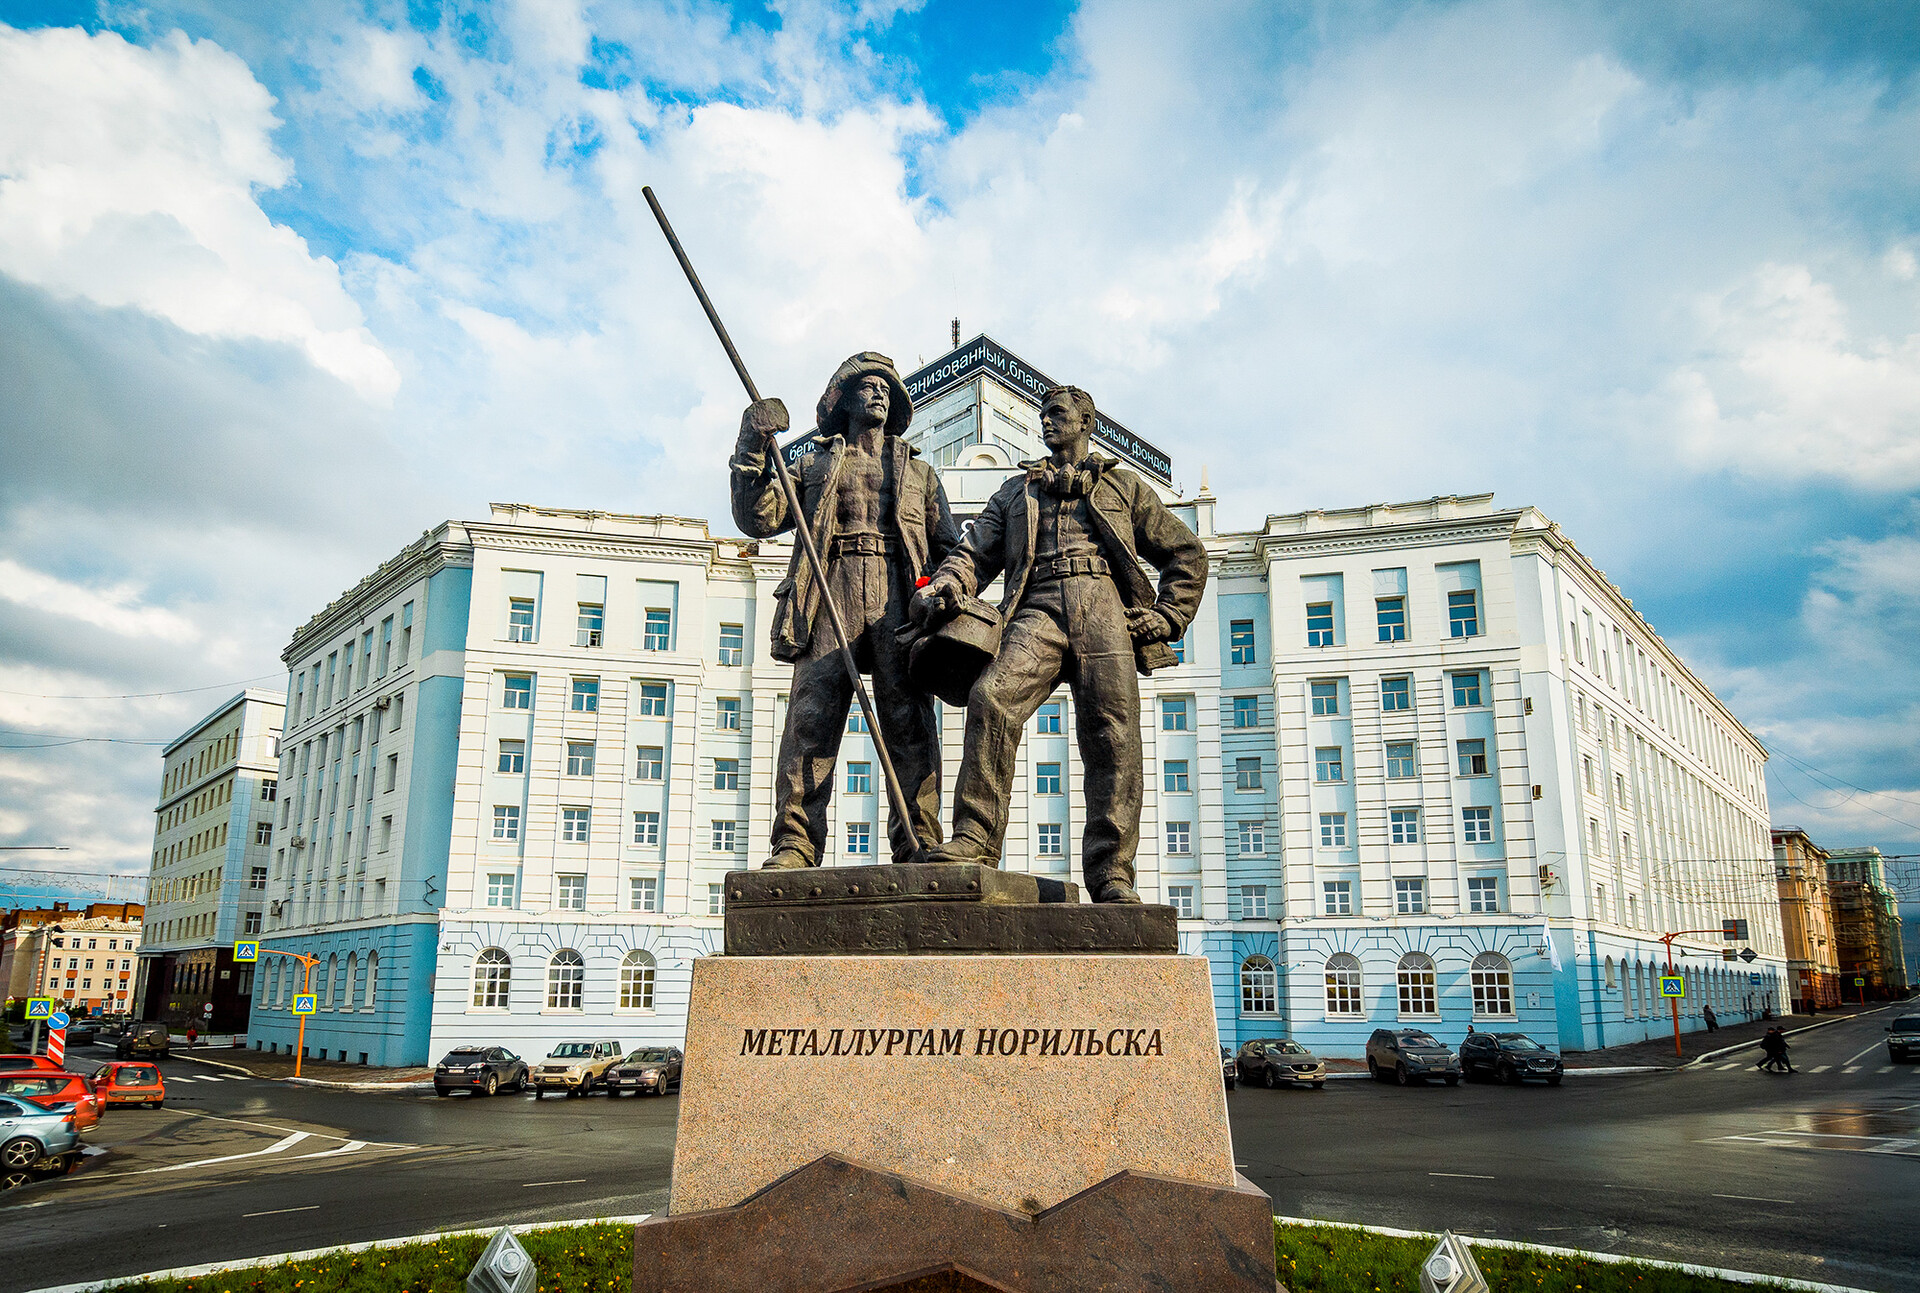 A monument to metallurgists in Norilsk.